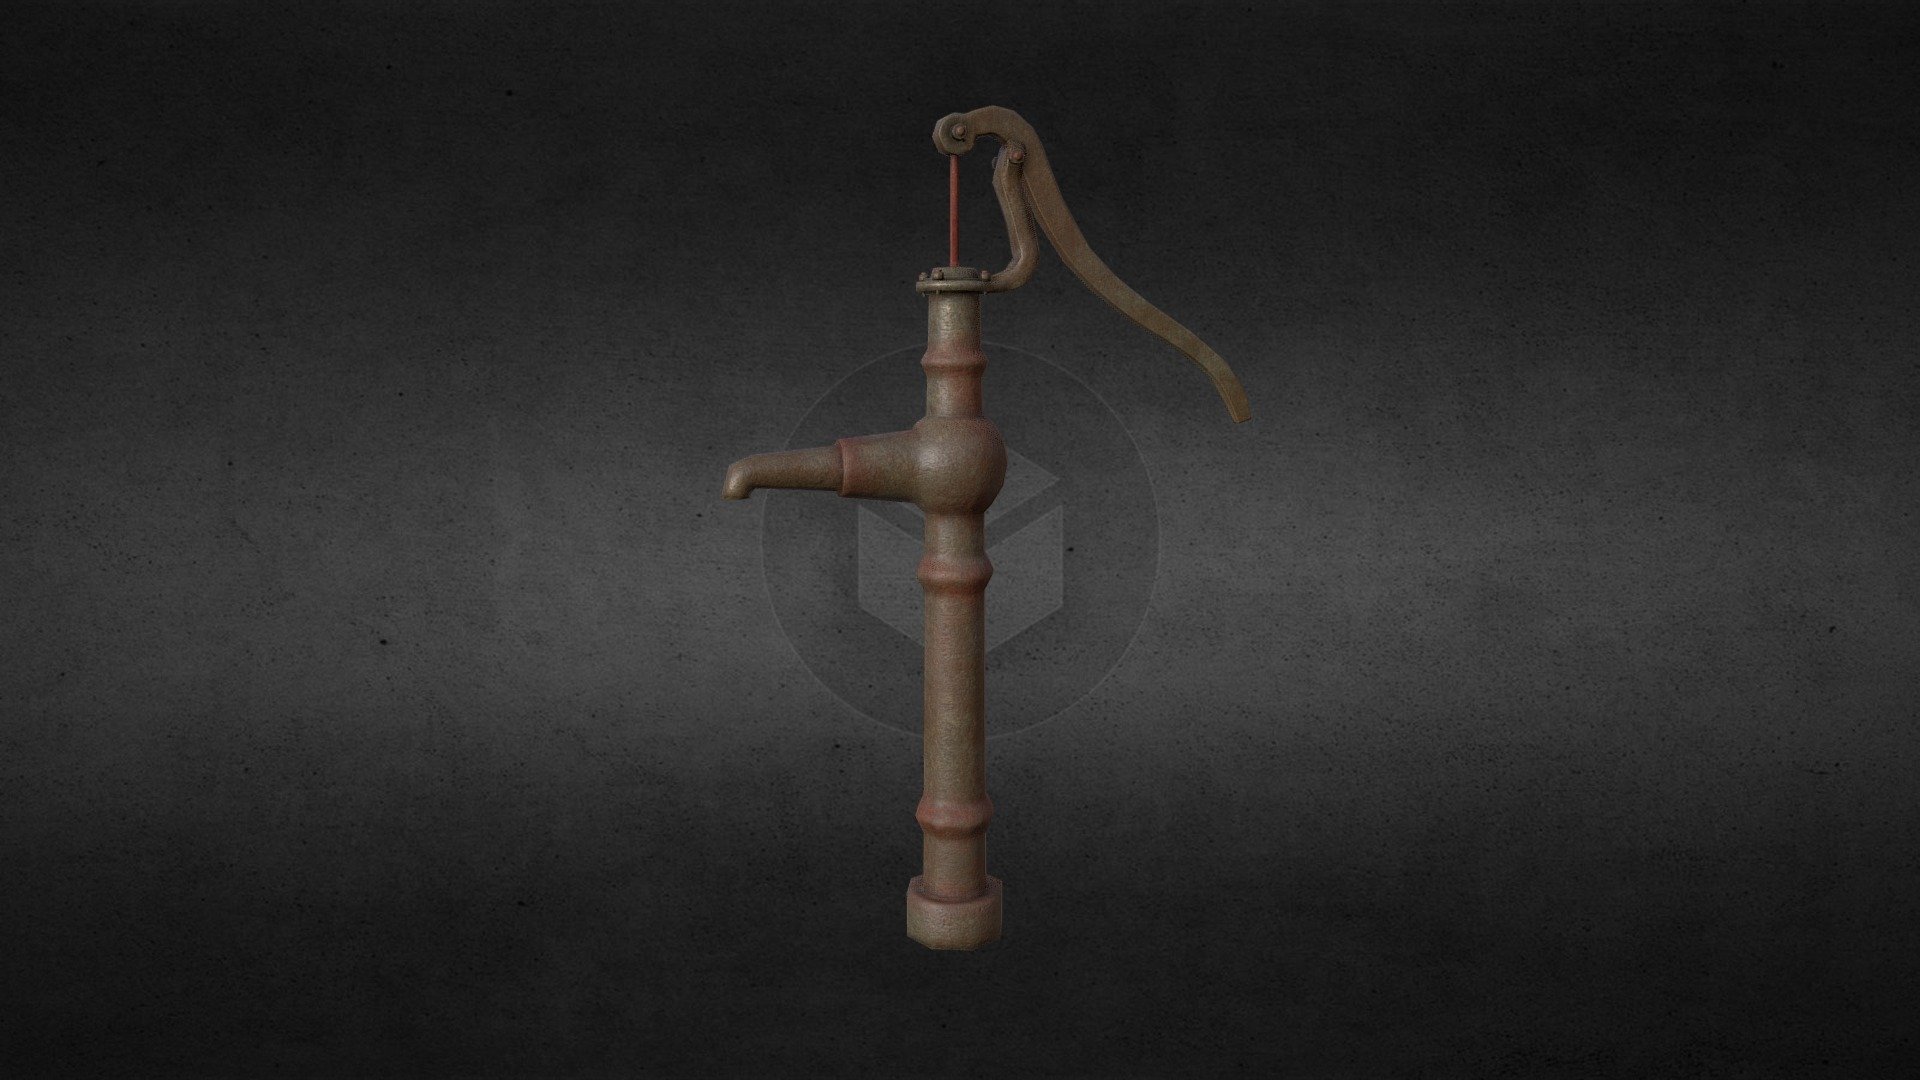 Western Pump for 3D zoo.
Modeled in Maya and Zbrush
Textured in Substance
2048 x 2048 Texture maps - Western Pump - 3D model by xhikara 3d model